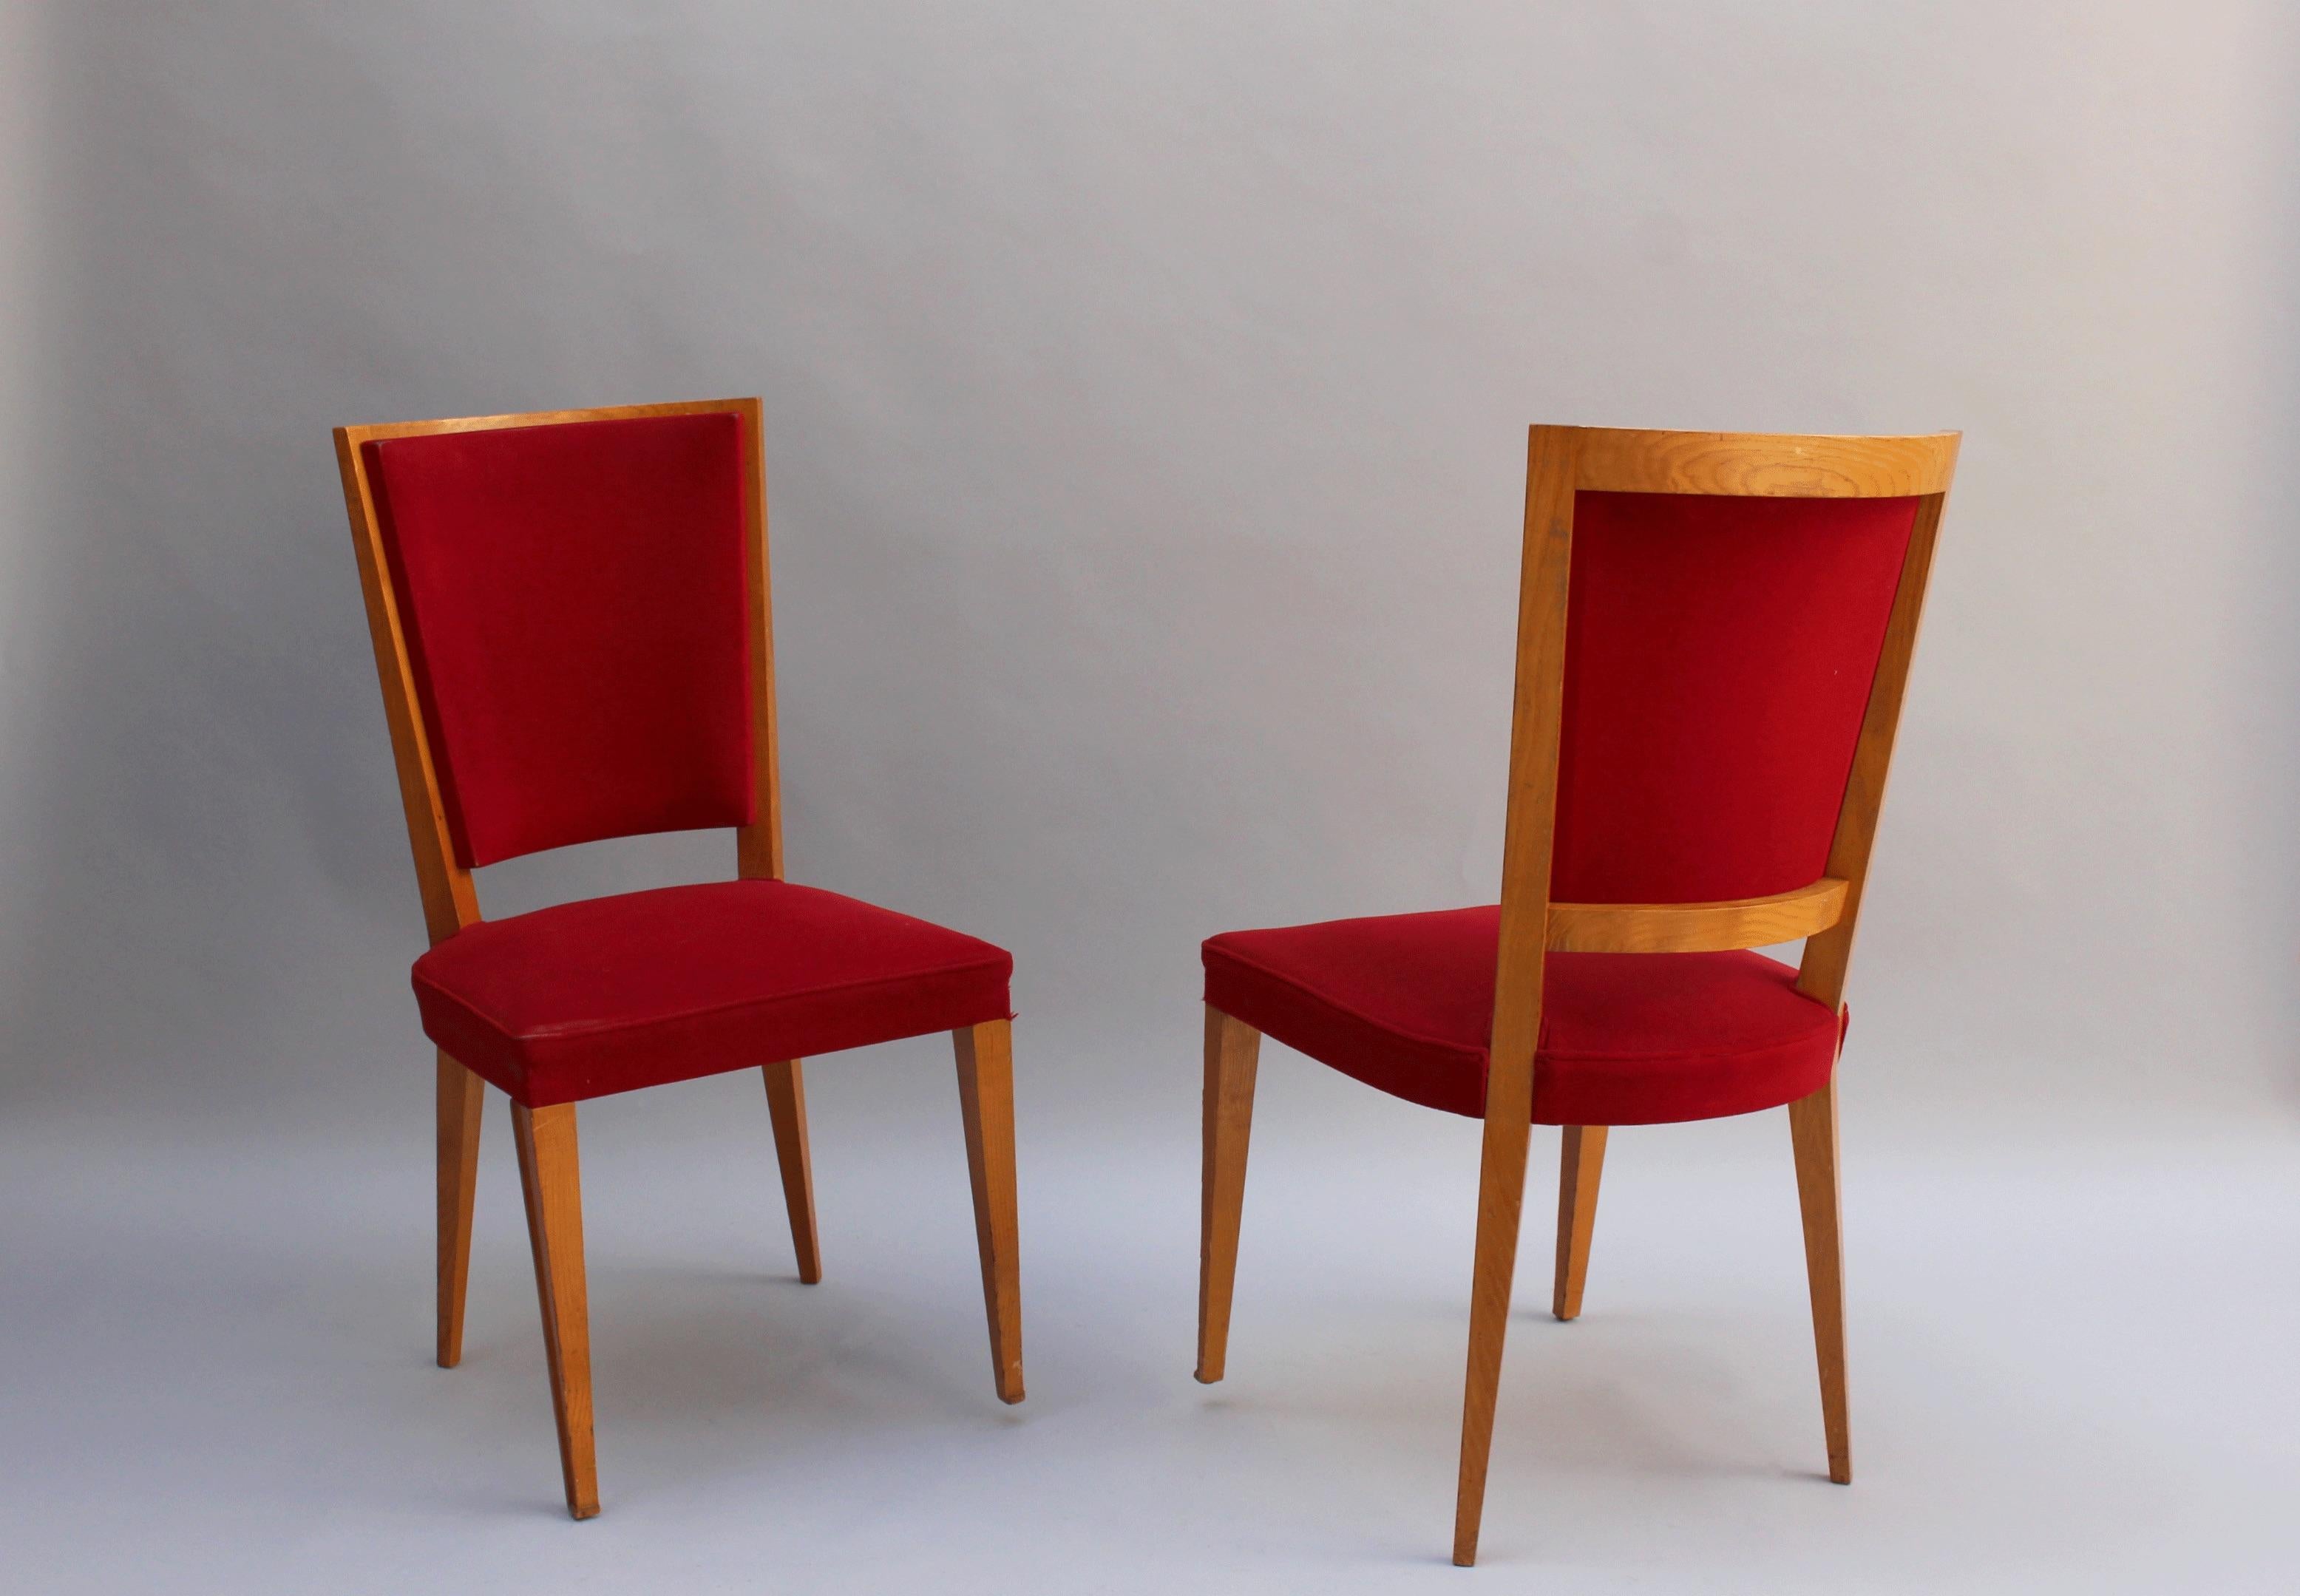 Four French 1940s solid oak dining chairs.
Price is per chair.